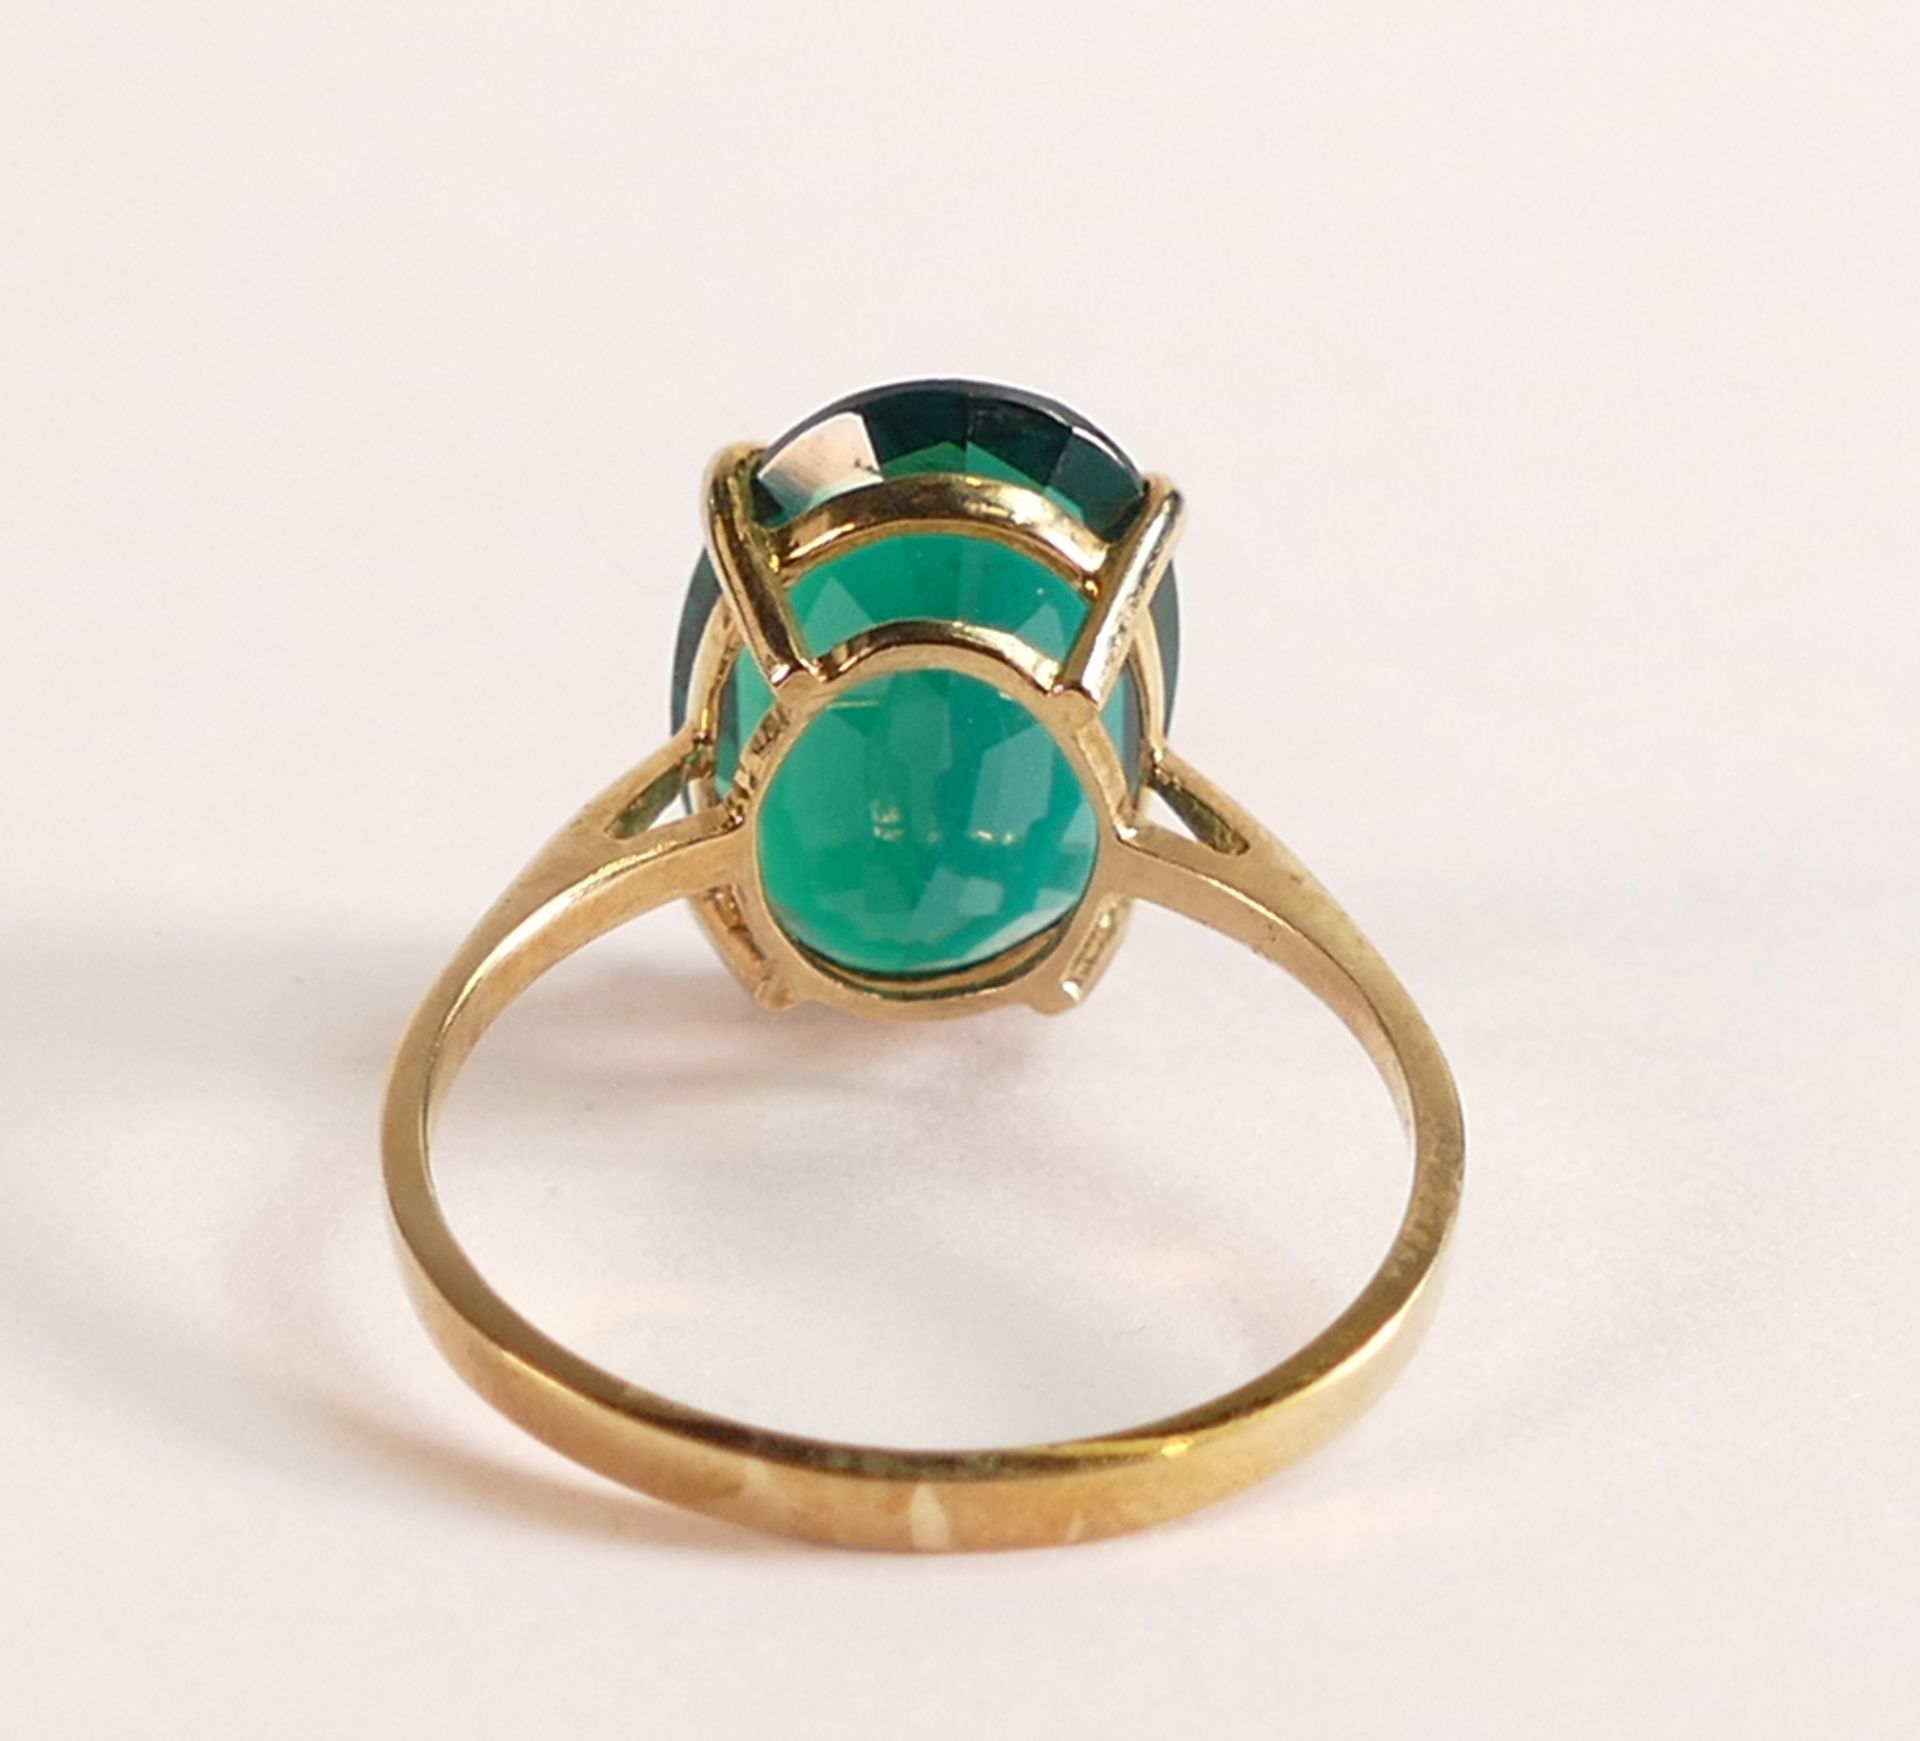 26 Lab Grown Emerald Valiant Ring 4.5 ct in 375 9ct Gold - This exceptional ring needs little - Image 3 of 3